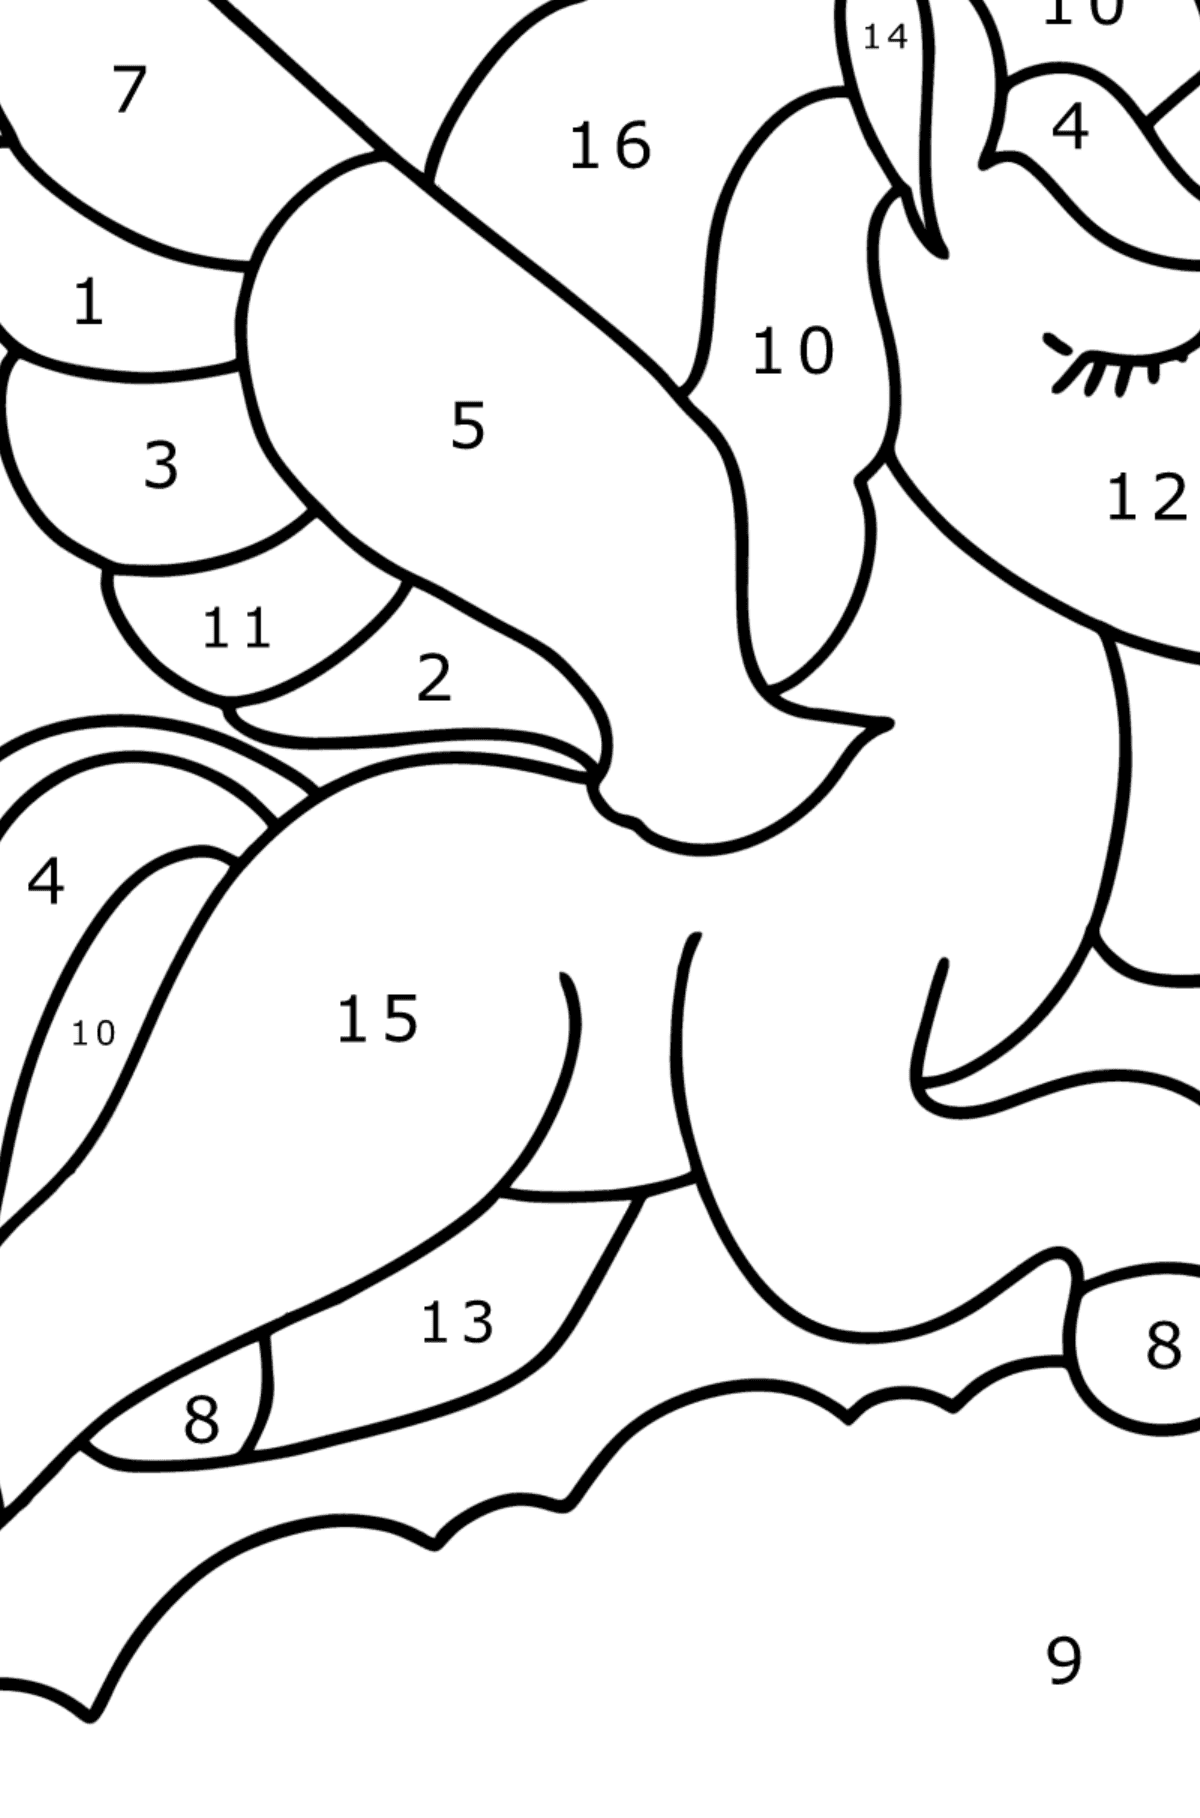 Unicorn with wings coloring page - Coloring by Numbers for Kids